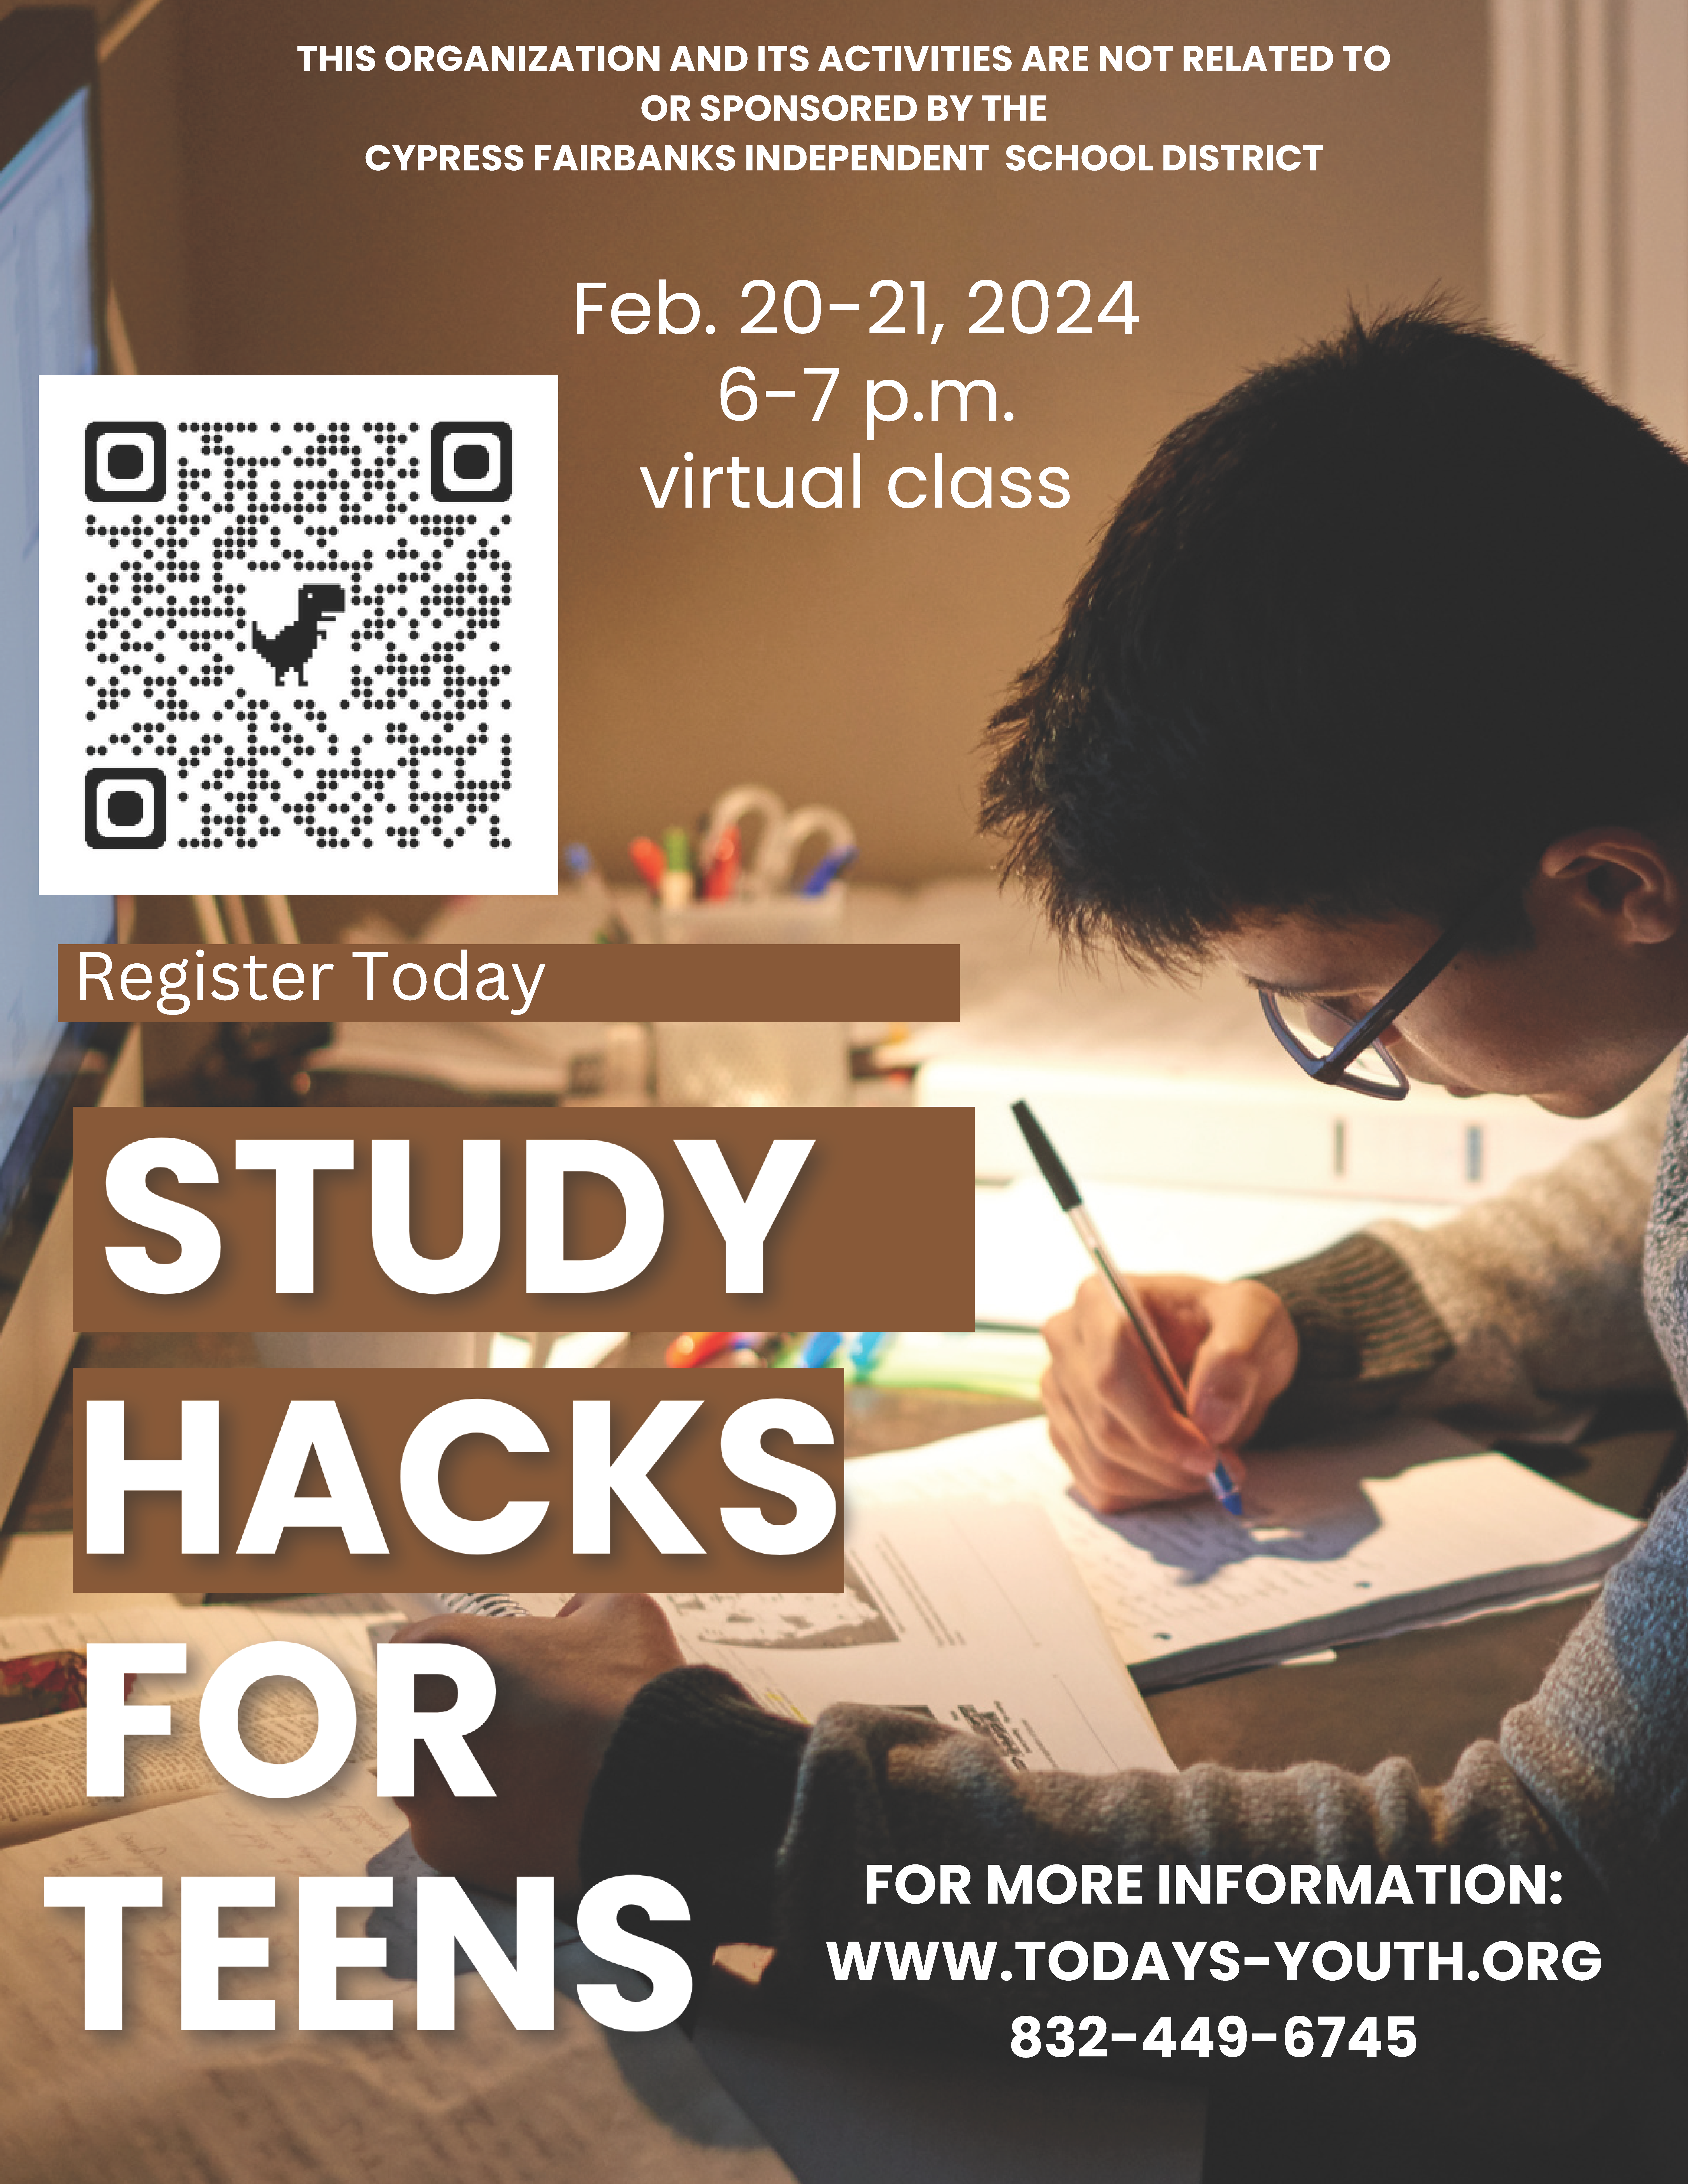   Study Hacks for Teens  Feb. 21-21, 2024 6-7 p.m. Virtual Class  For more information, go to www.todays-youth.org or call 832-449-6745  This activity is not related to or sponsored by the Cypress-Fairbanks Independent School District.